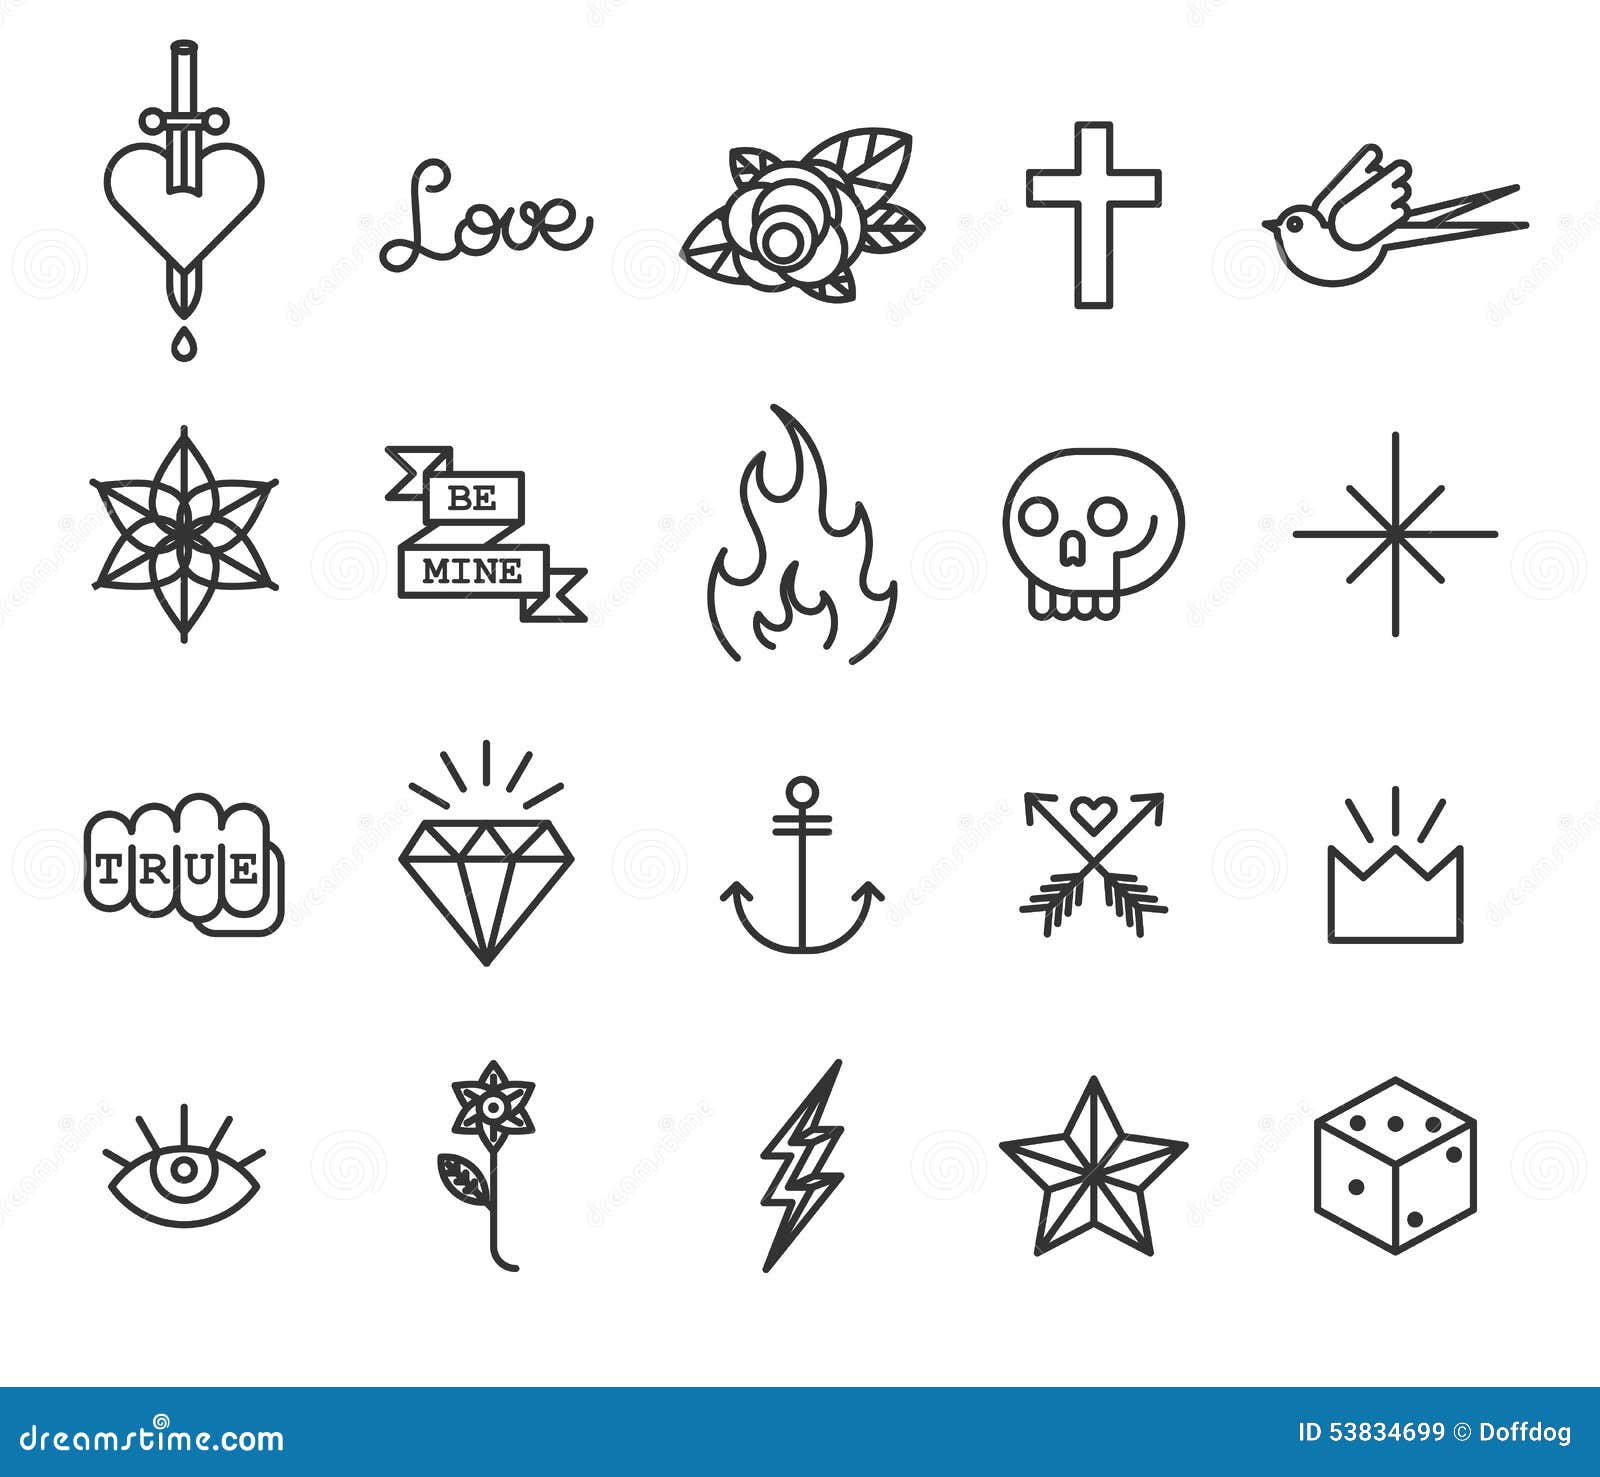 Tattoo Element Doodle Images Browse 240859 Stock Photos  Vectors Free  Download with Trial  Shutterstock